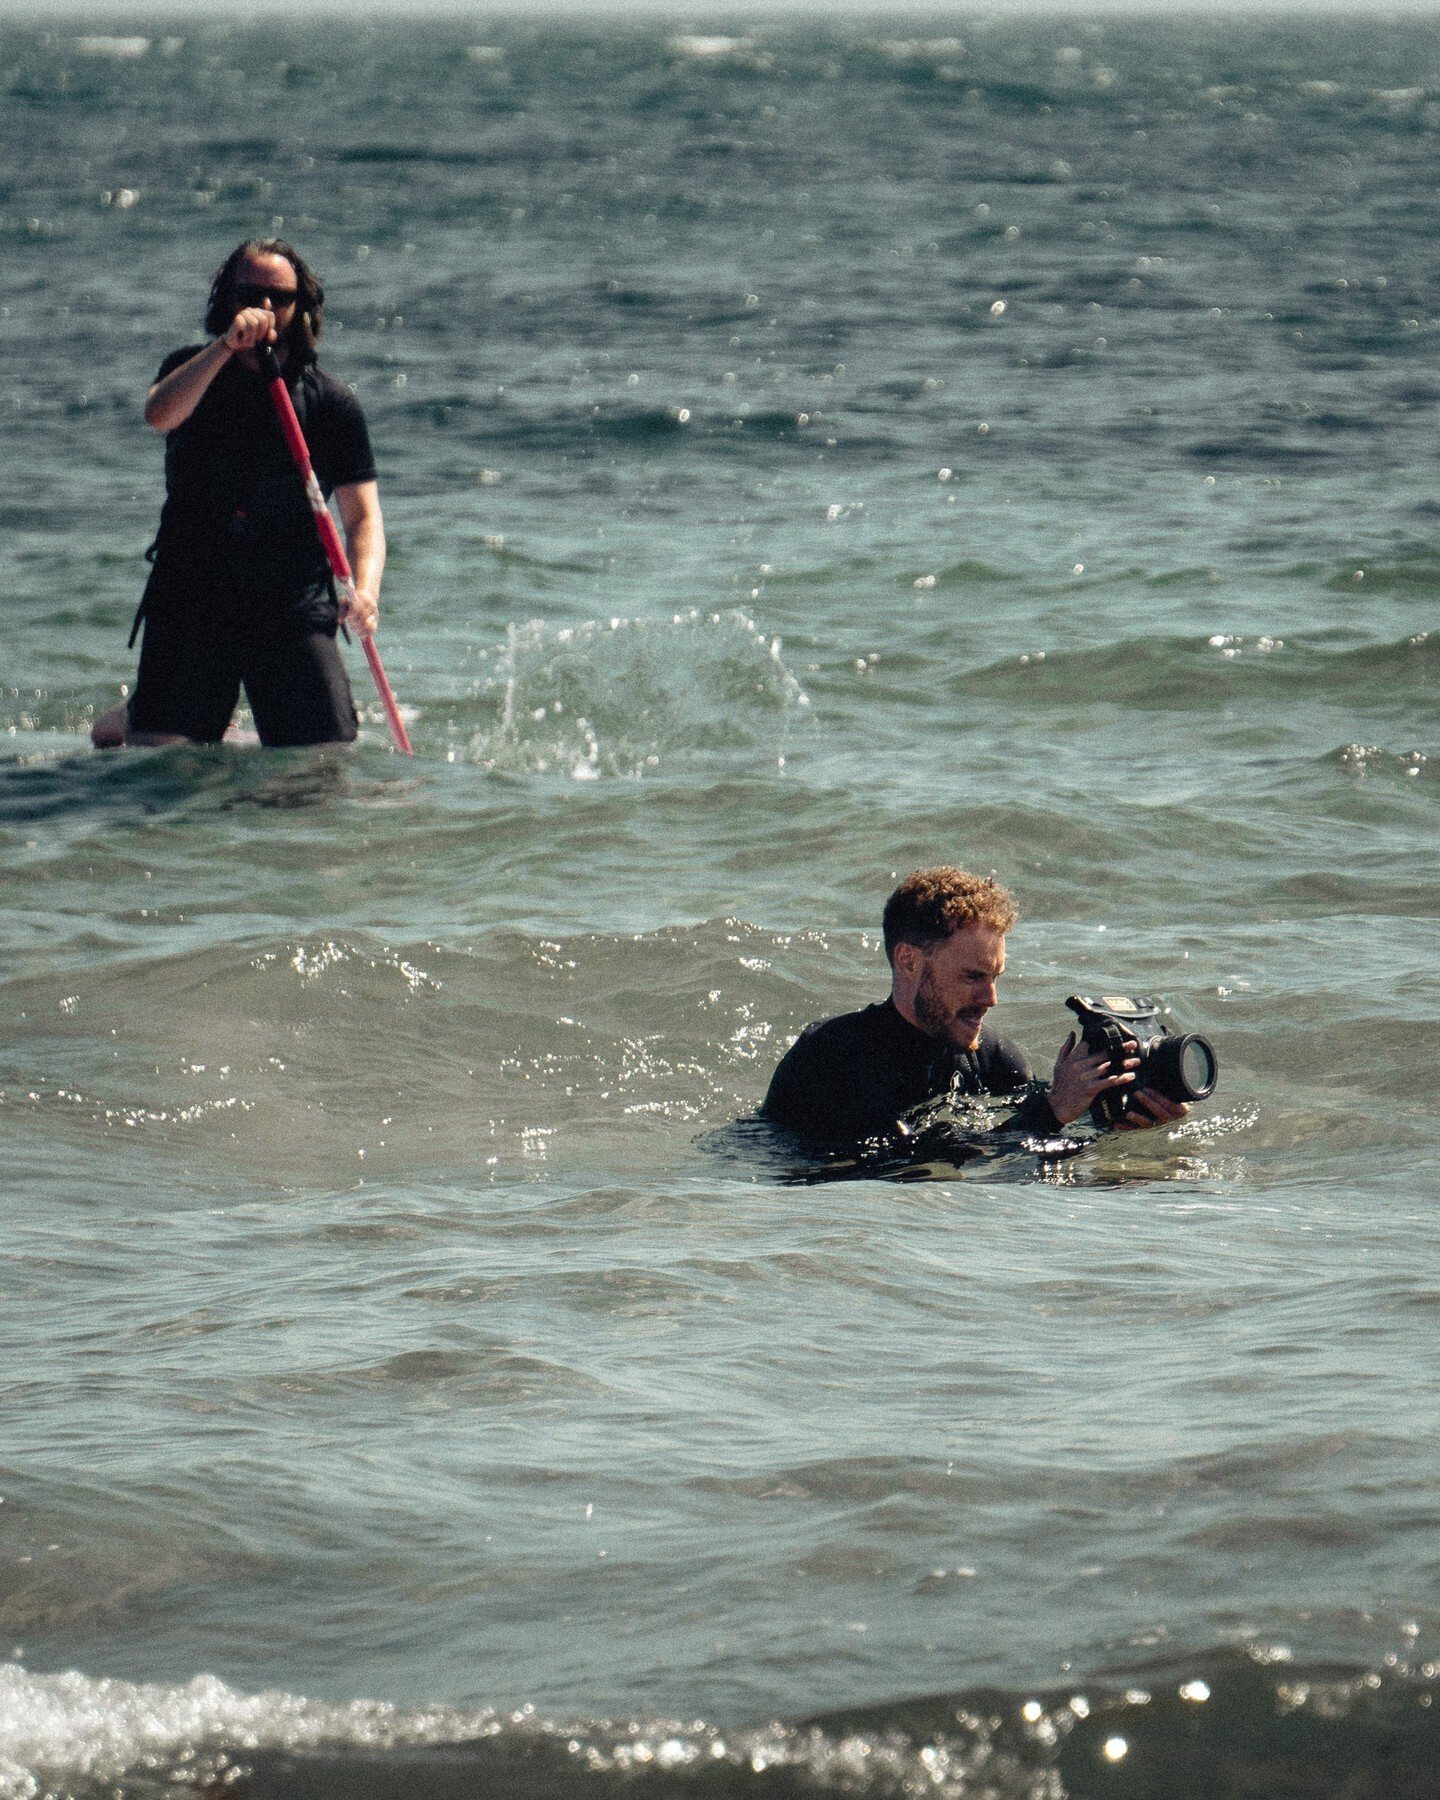 If you take a DEEP BREATH, FOCUS, KEEP CALM, CONCENTRATE ON THE SHOT...you can pretend it's not freezing cold Scottish water. ⁠
⁠
⁠
#film #musicvideo #beachvibes #scotland #thorntonlochbeach #cinematography #behindthescenes #scottishband #filmmaking 